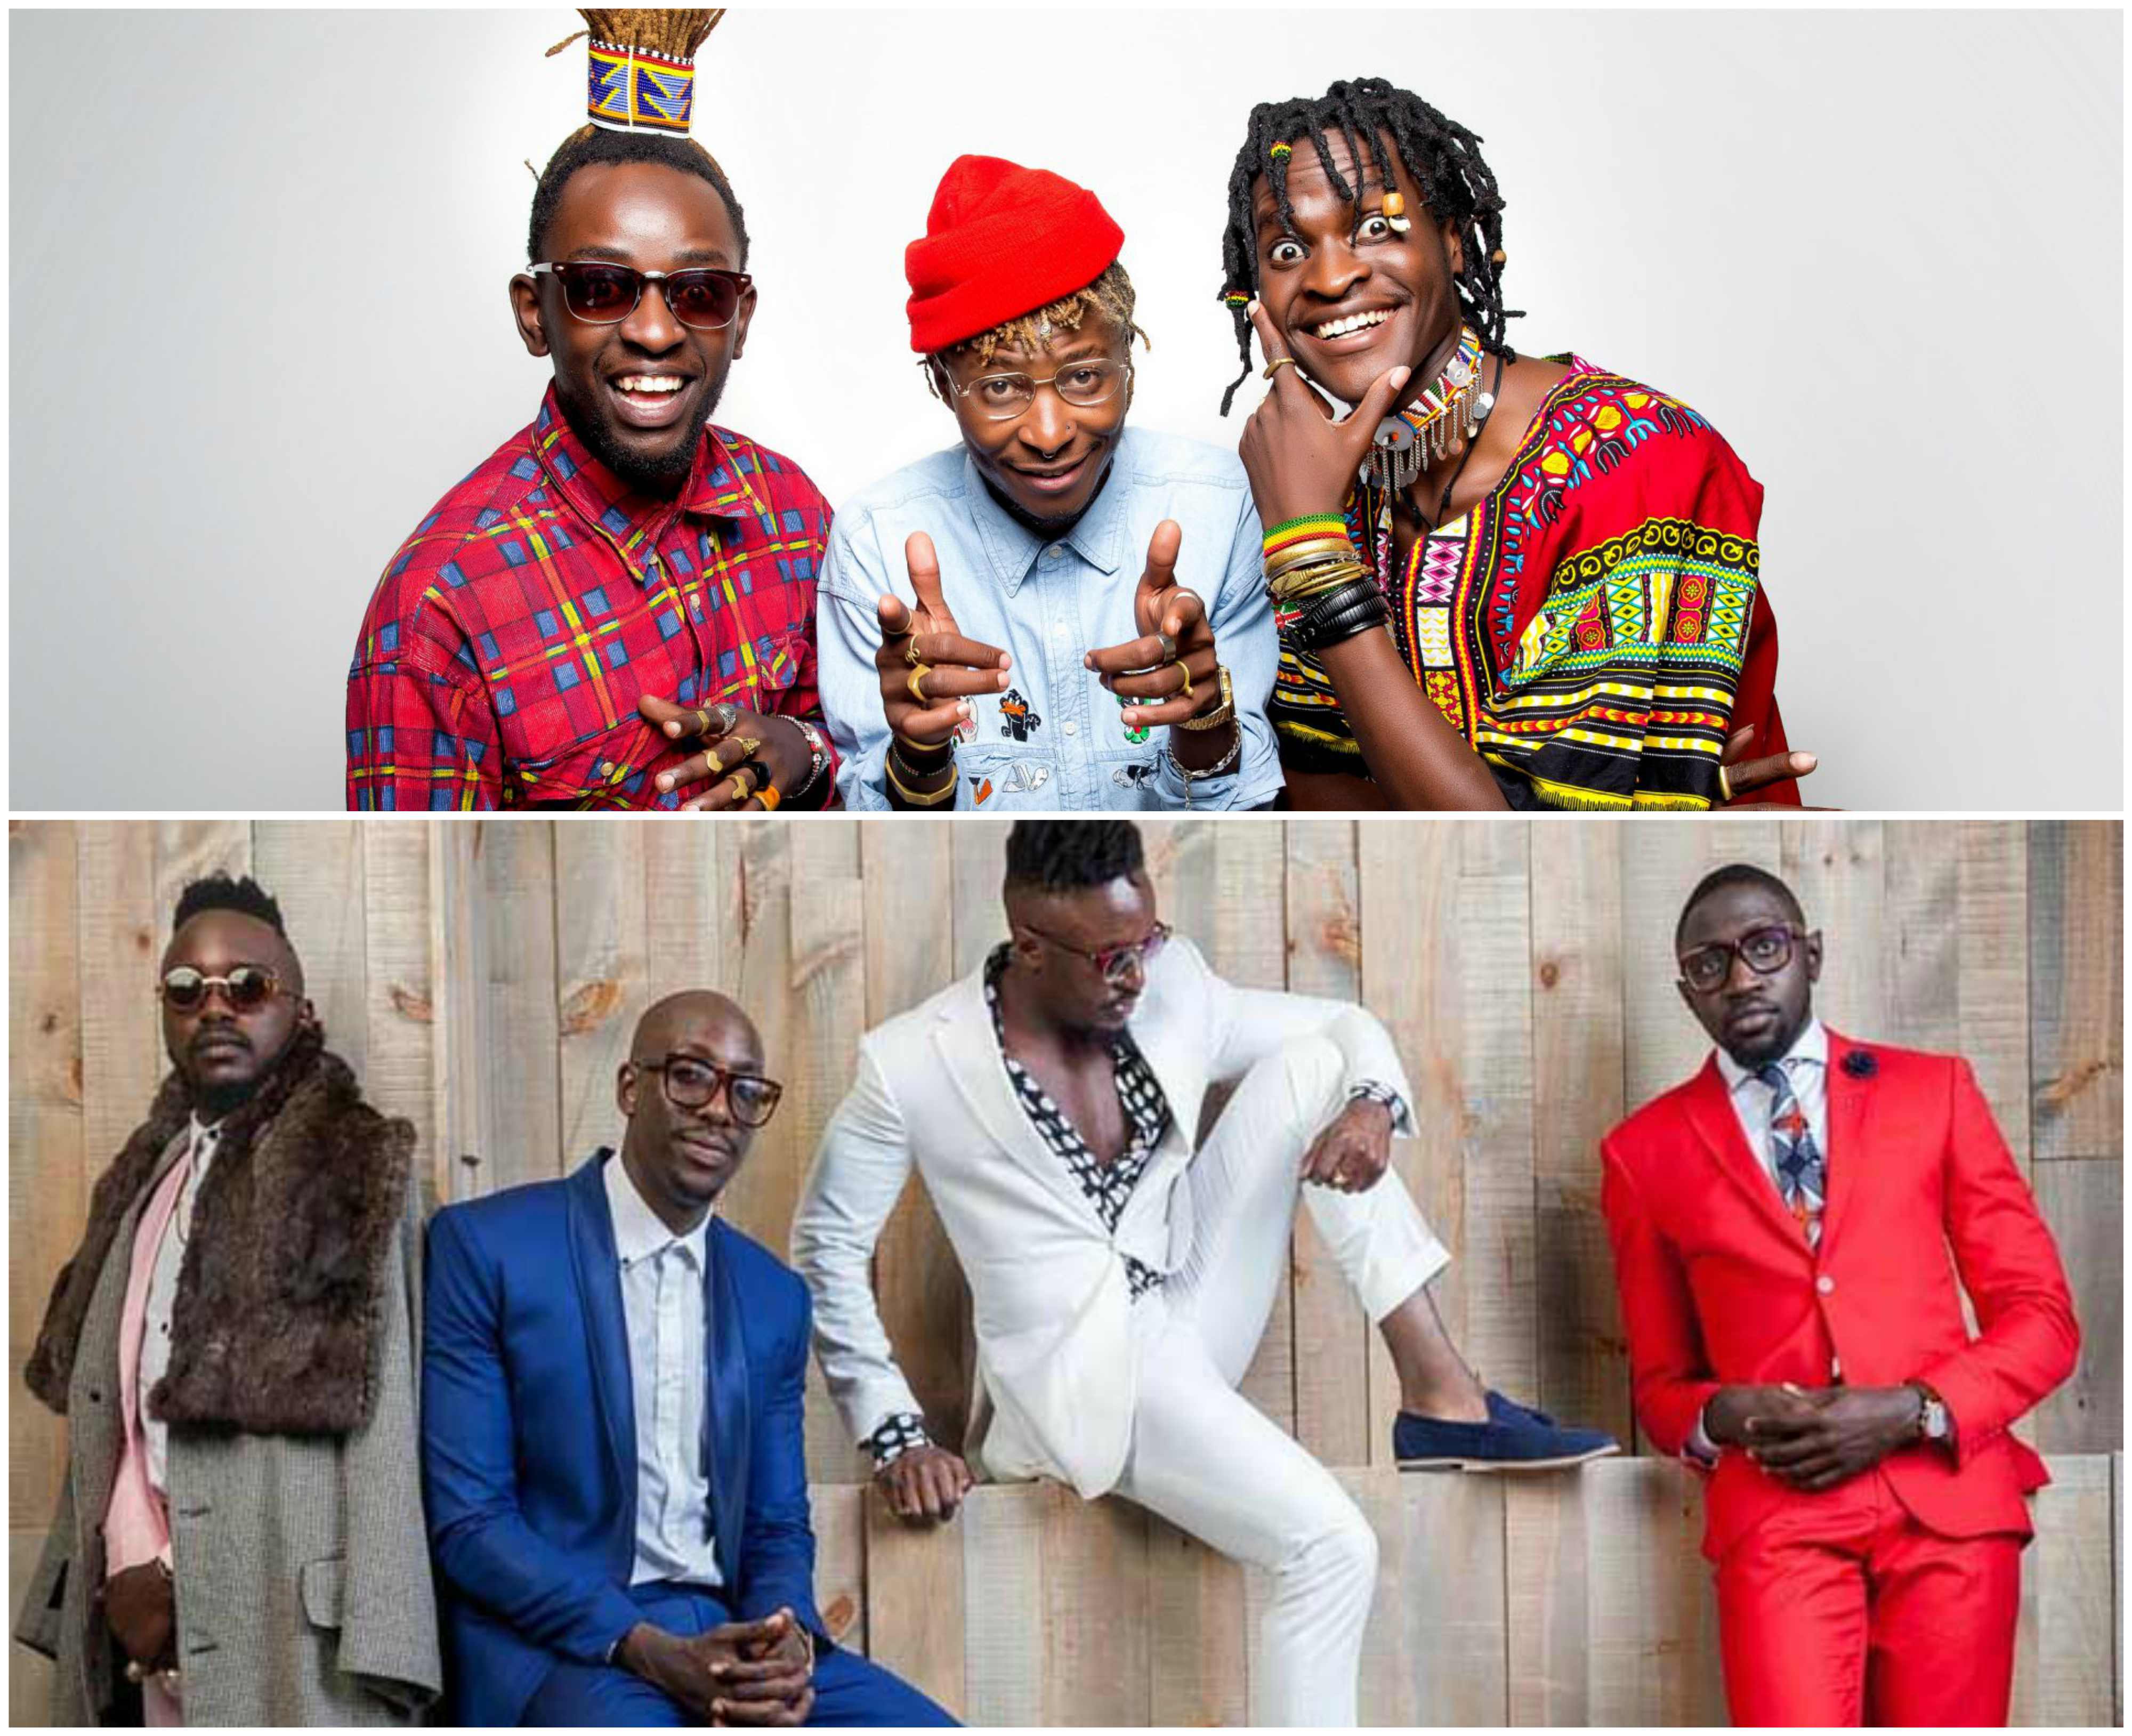 H_art The Band’s collabo with Sauti Sol titled ‘Issa Vibe’ is a big tune (Audio)